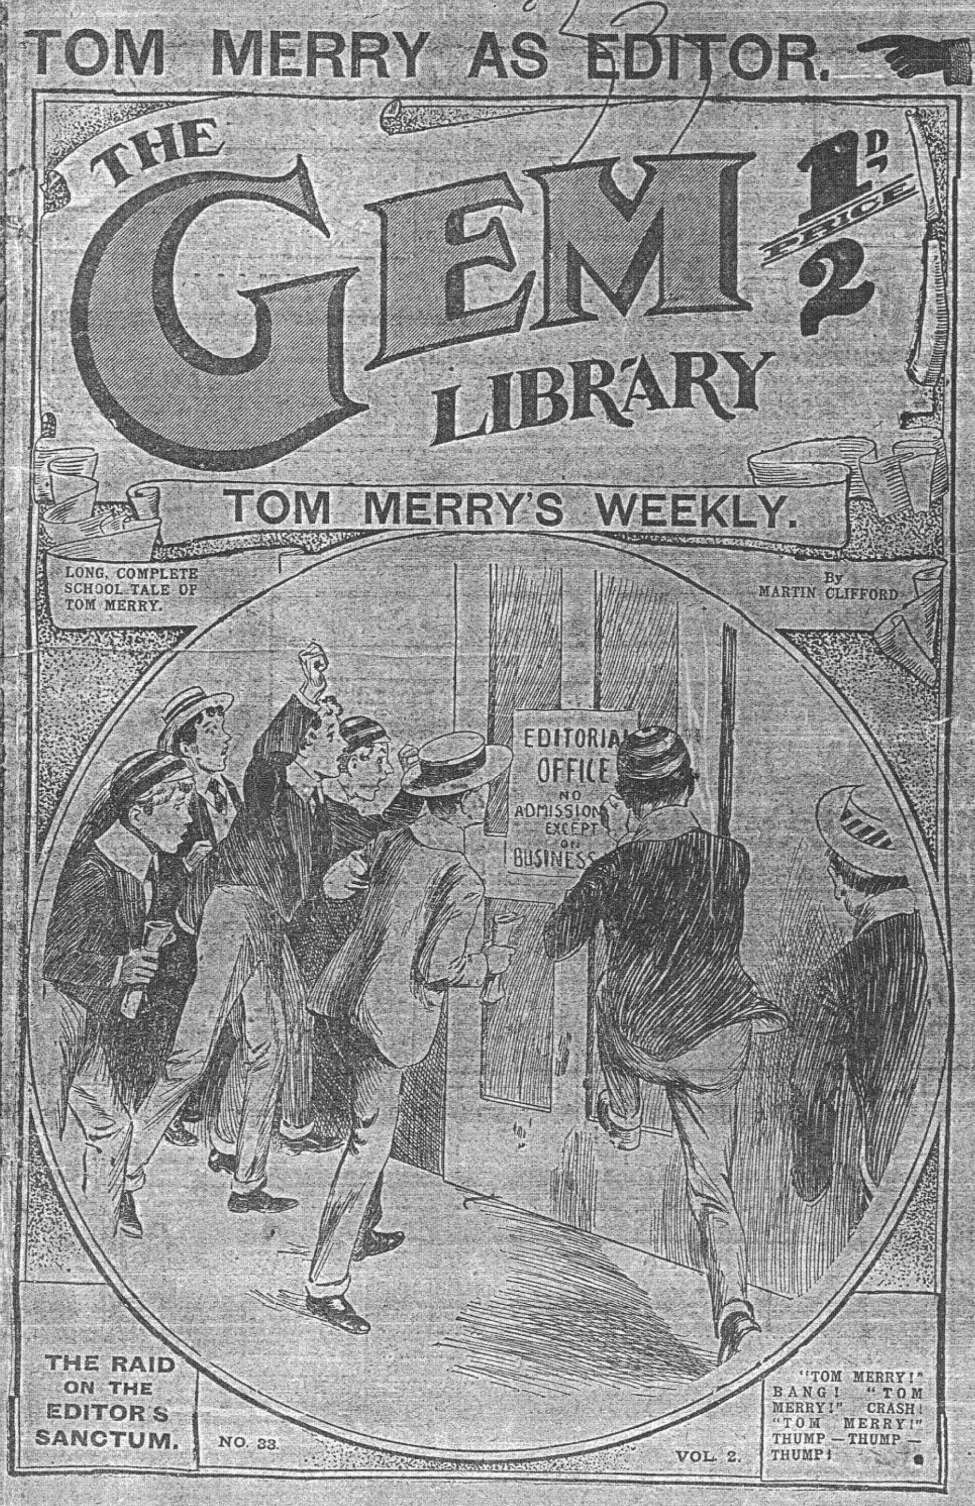 Book Cover For The Gem v1 33 - Tom Merry’s Weekly